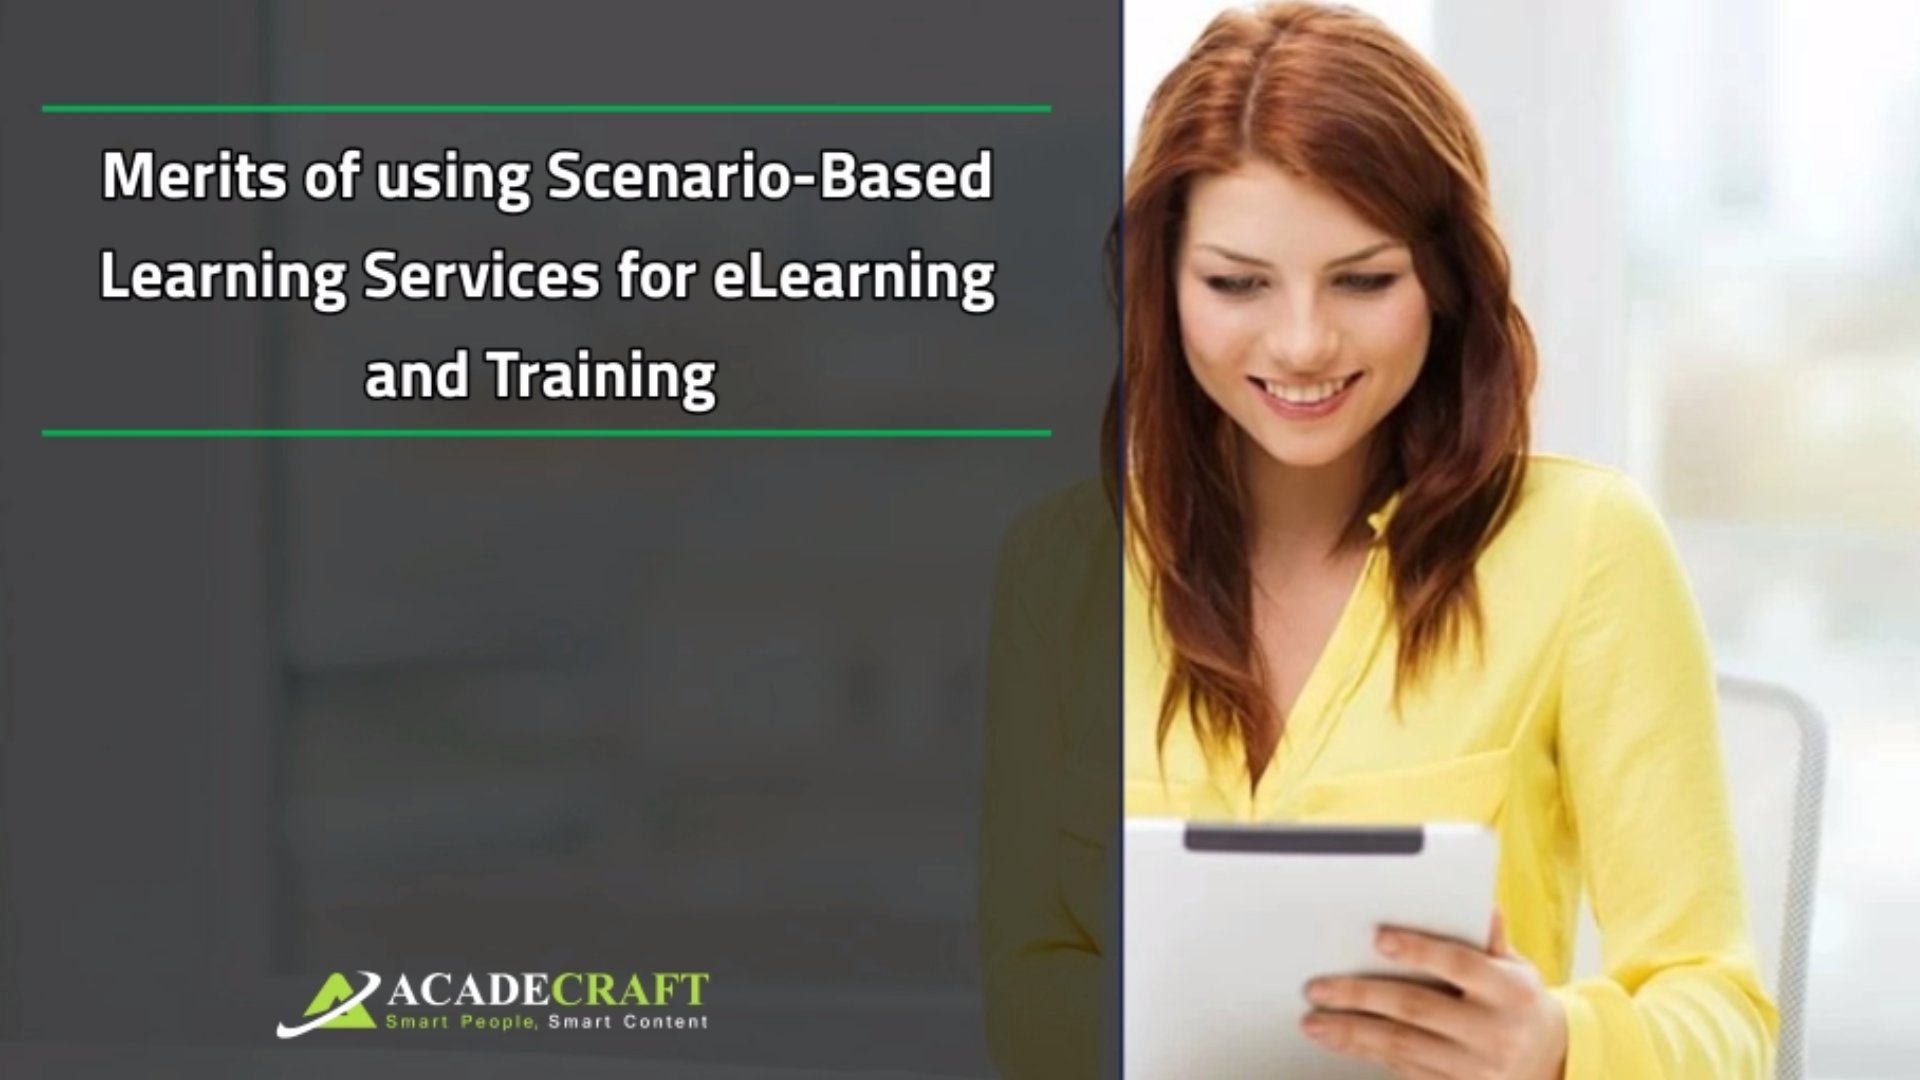 Merits of Using Scenario-Based Learning Services for e-learning and training